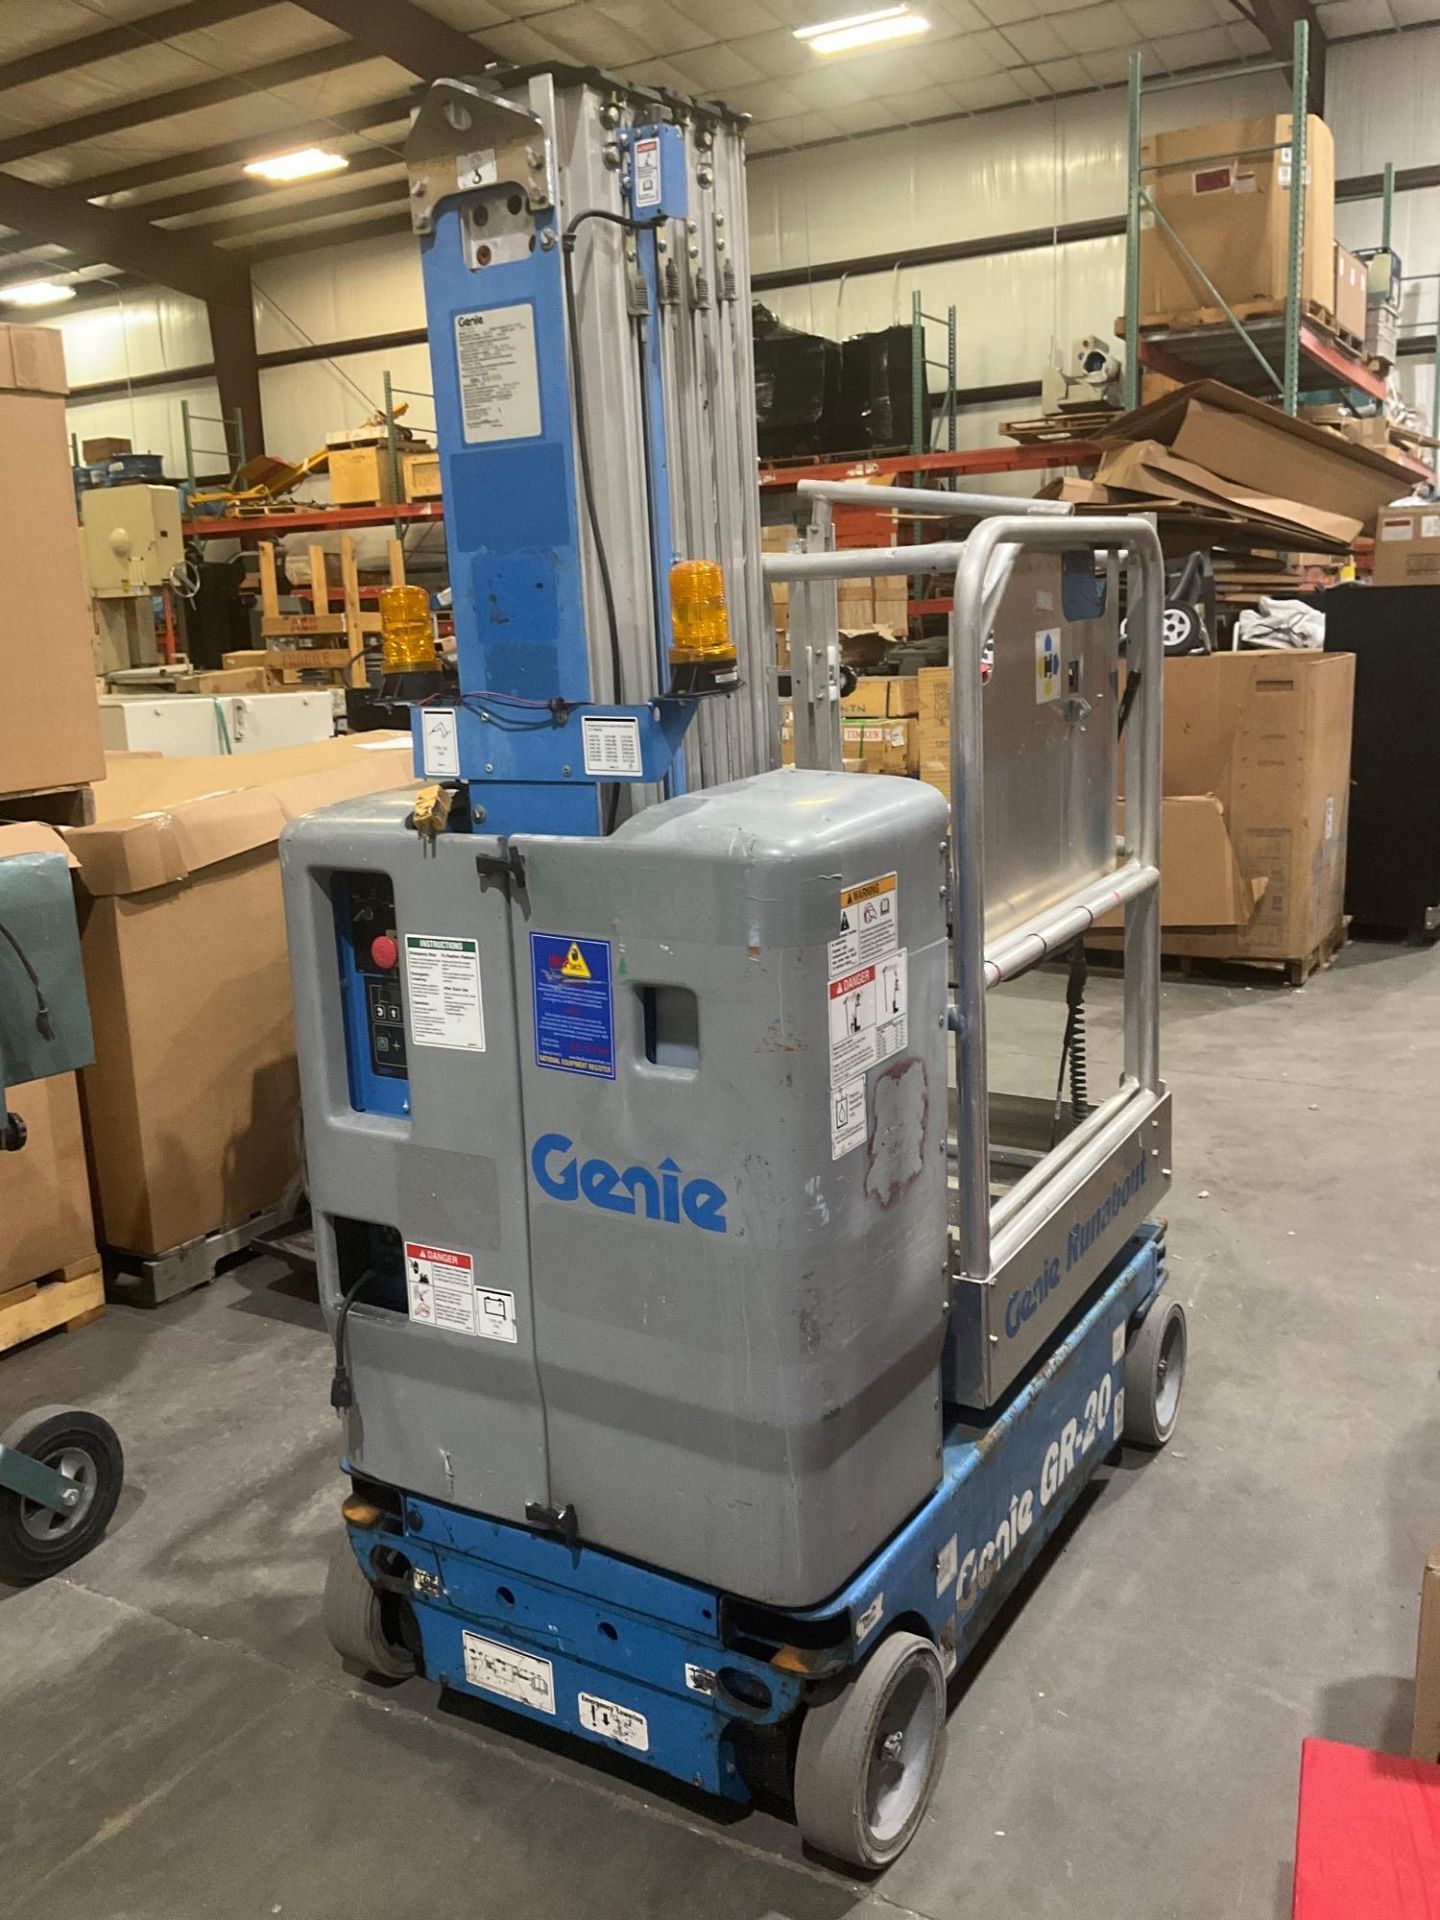 GENIE MANLIFT MODEL GR-20, ELECTRIC, APPROX MAX PLATFORM HEIGHT 20FT, NON MARKING TIRES, BUILT IN BA - Image 8 of 13